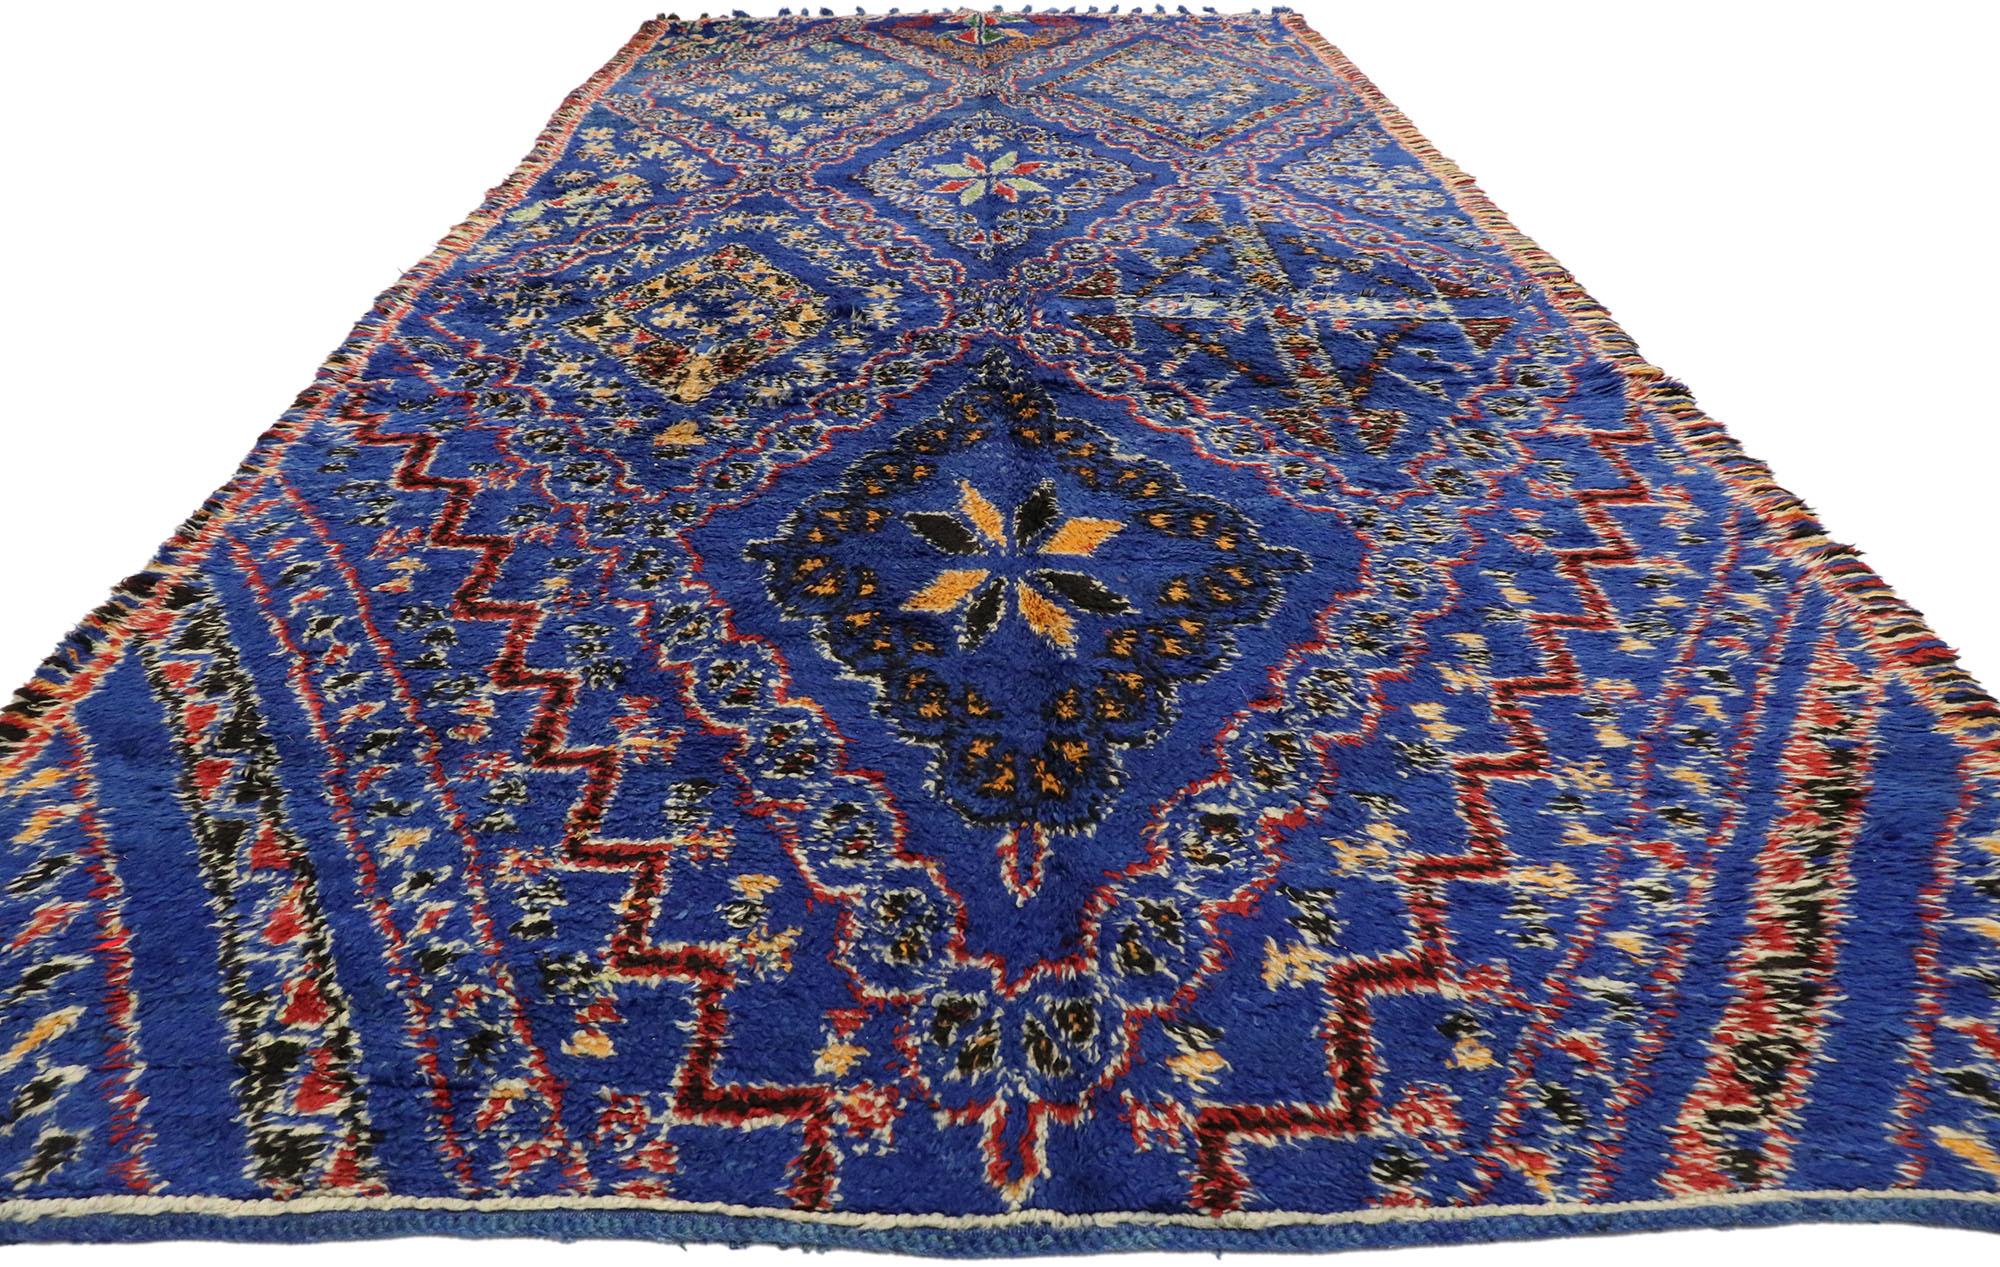 Hand-Knotted Vintage Blue Beni Mguild Moroccan Rug with Mid-Century Modern Tribal Style For Sale